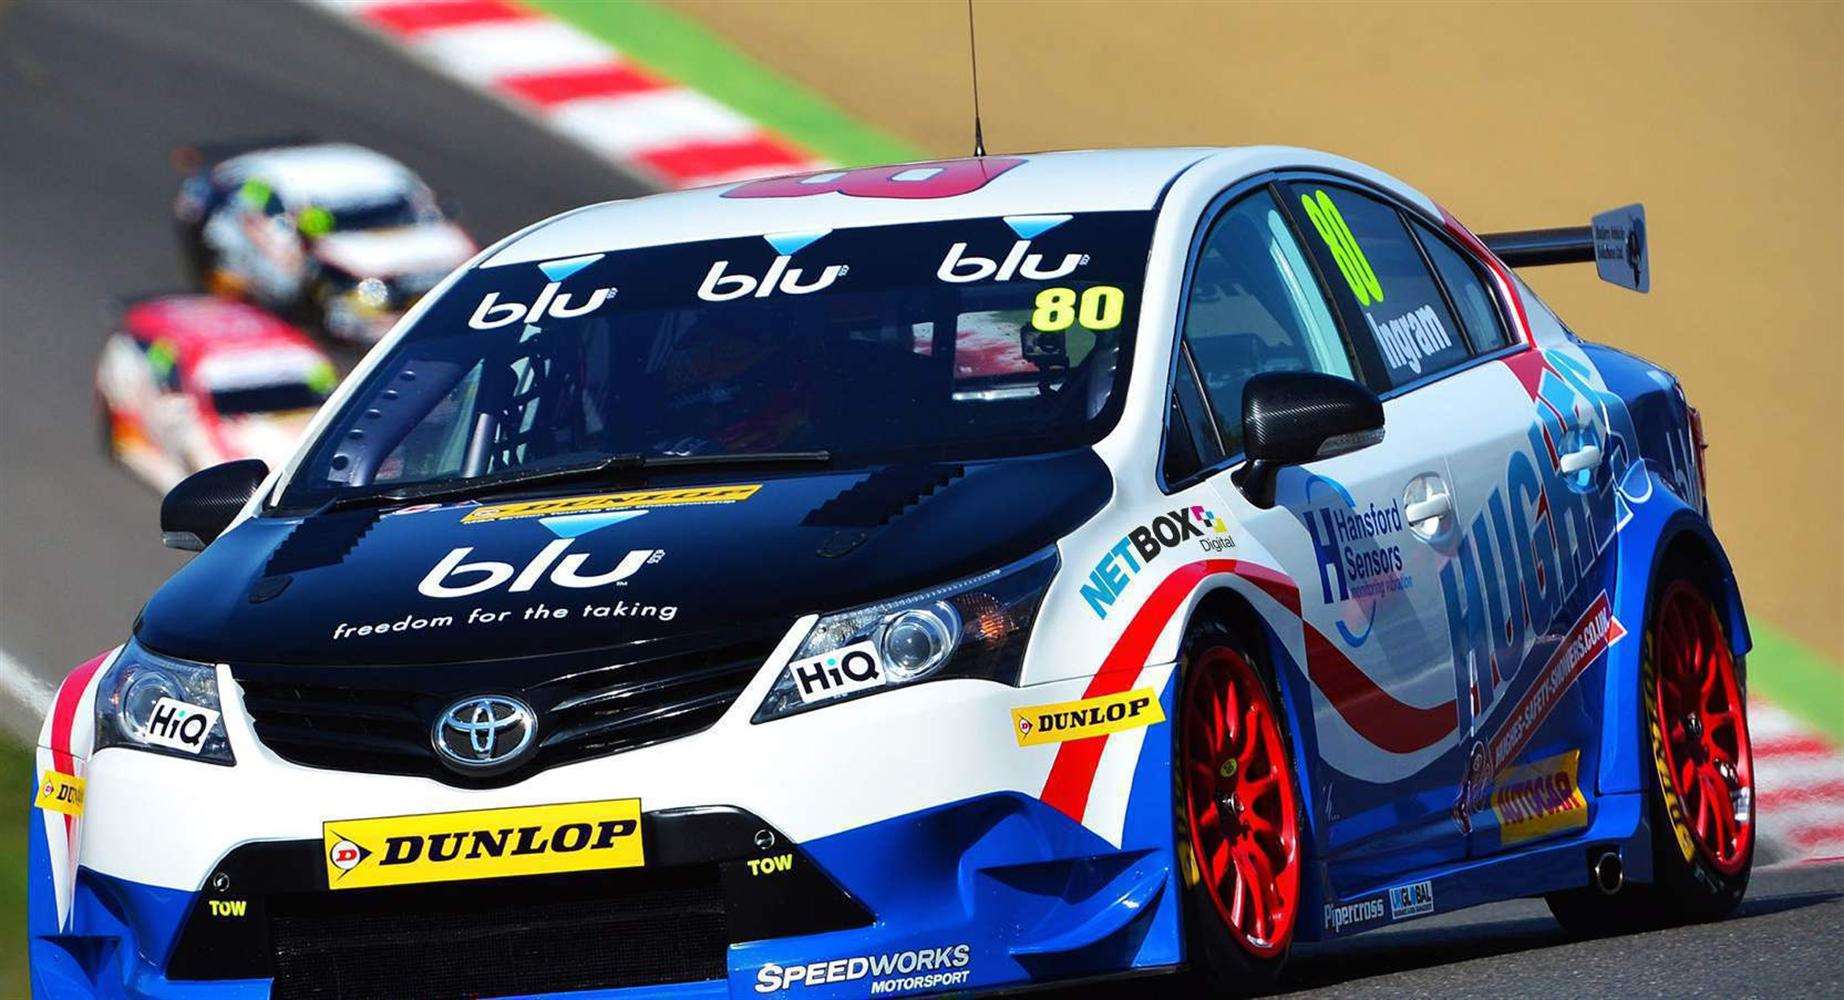 Rochester-based print, copy and scan business Netbox Digital is sponsoring British Touring Car Championship team Speedworks Motorsport